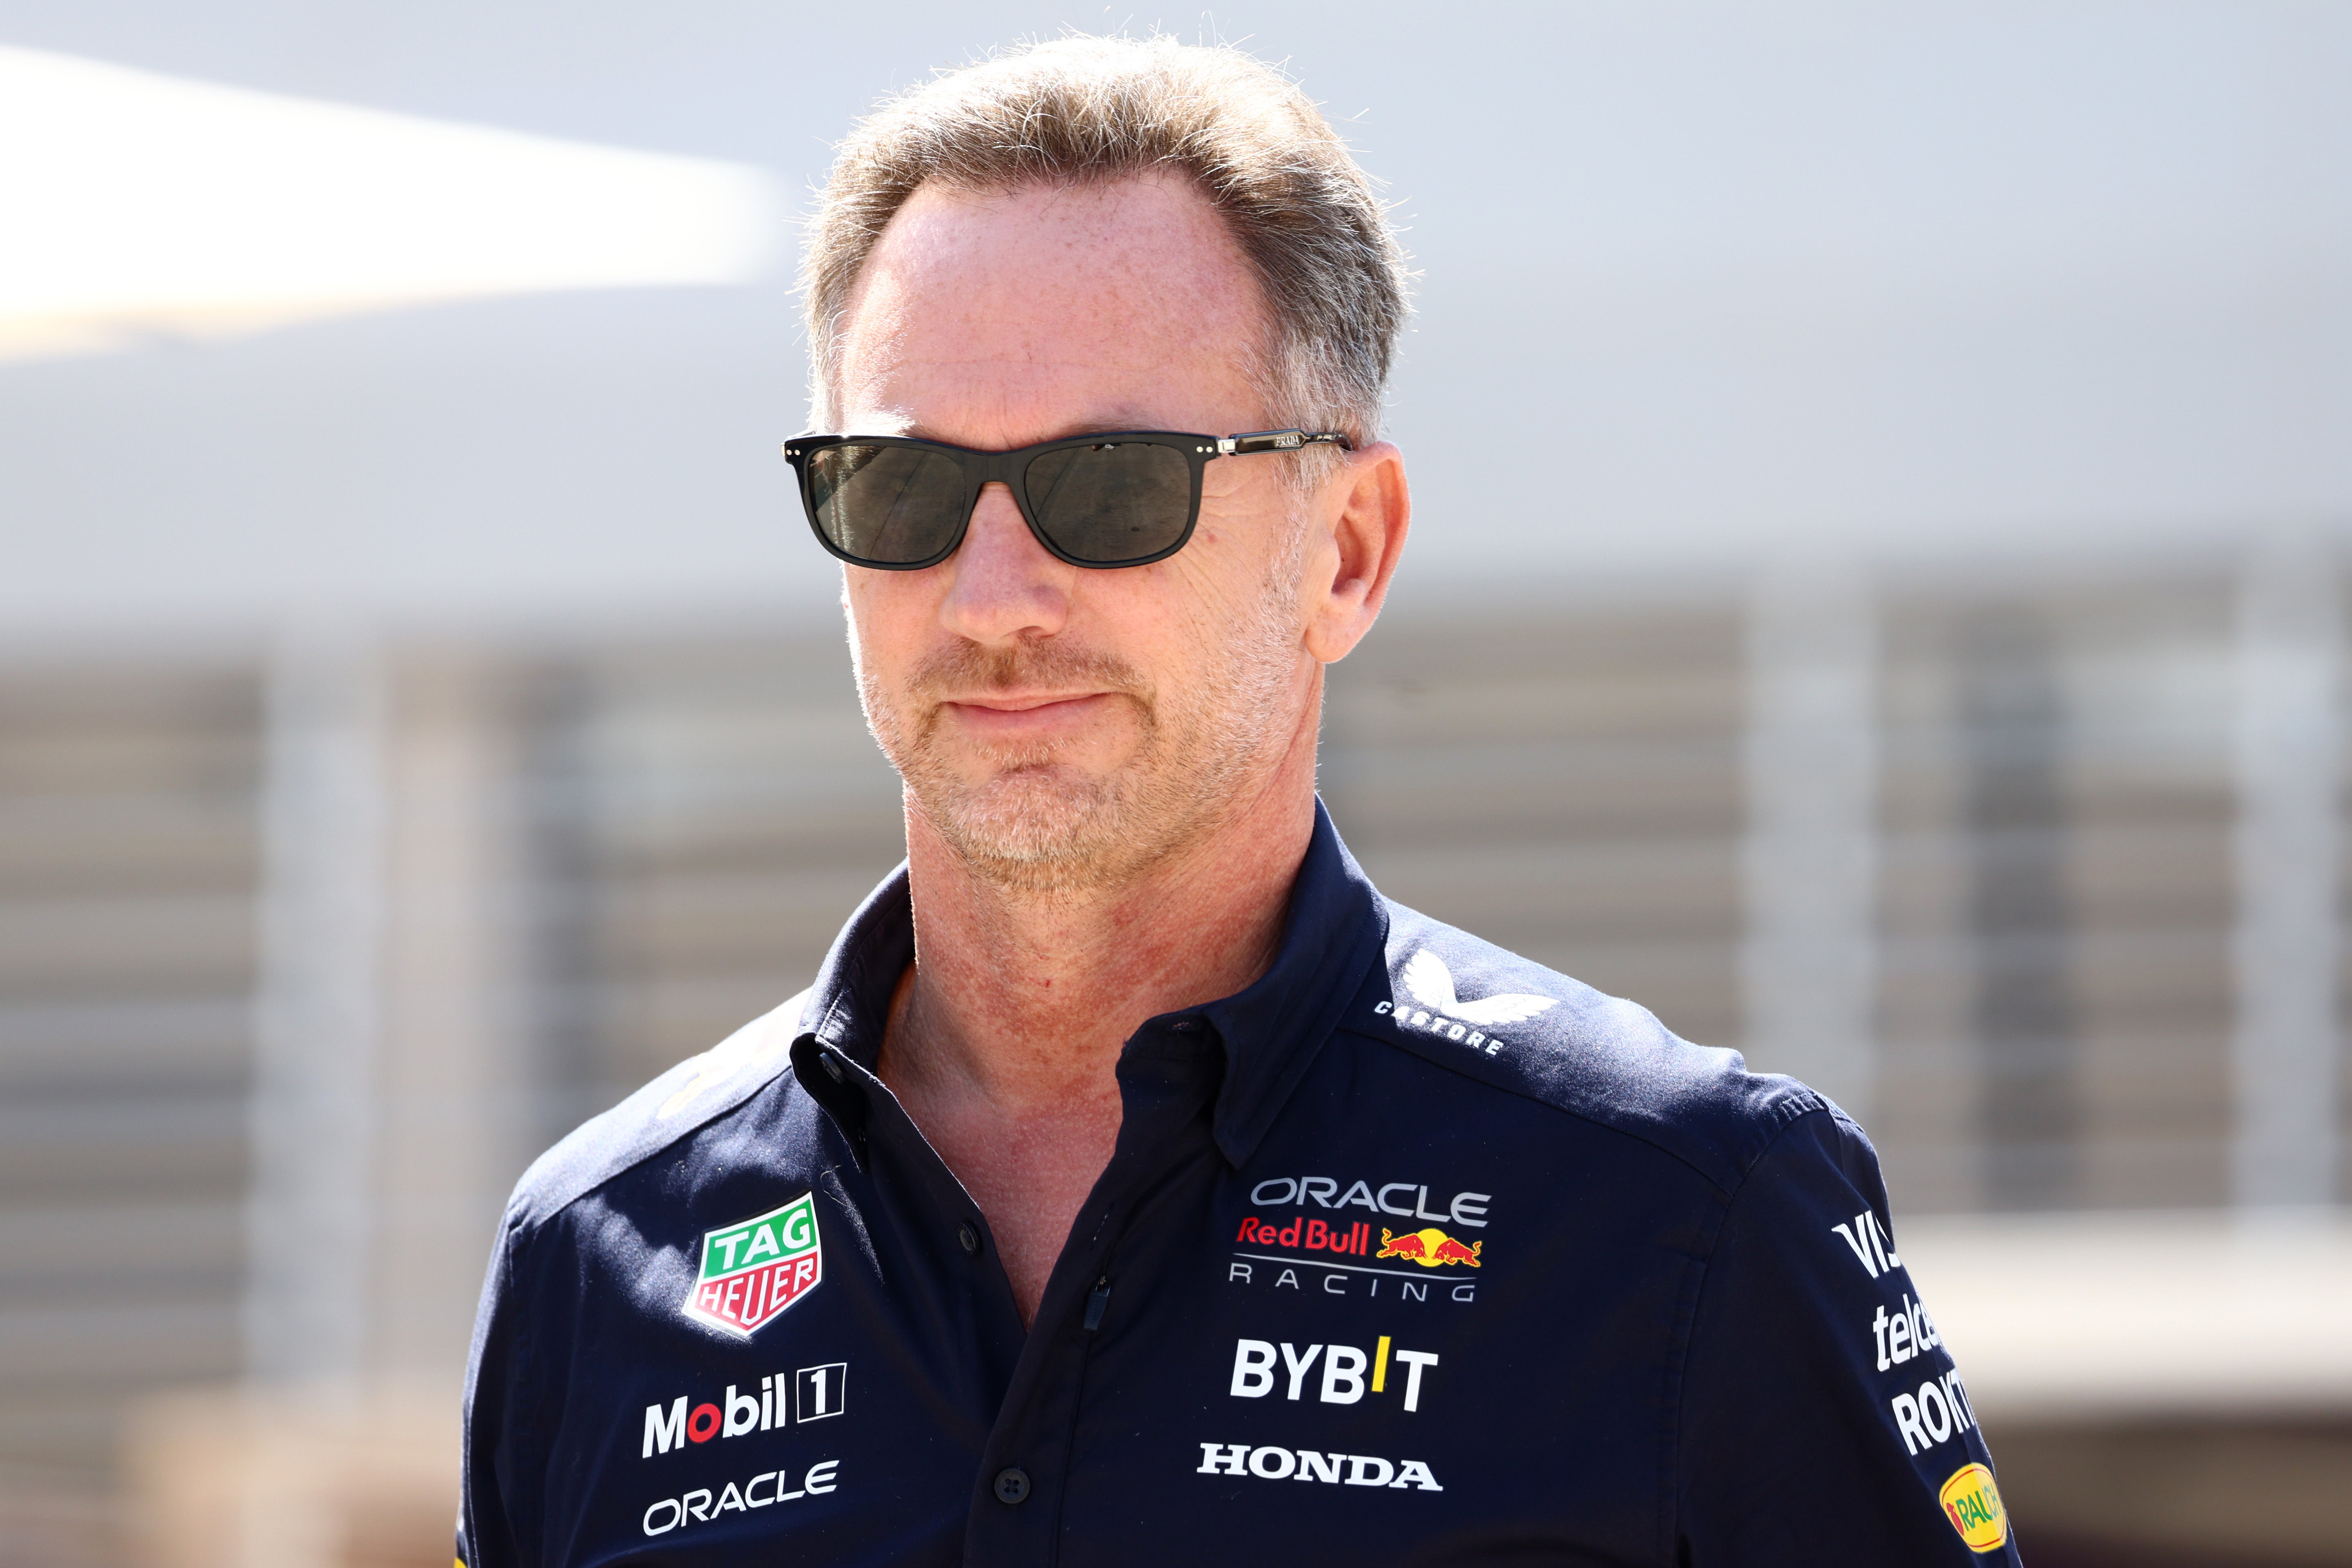 Christian Horner admits he is ‘pleased’ the probe into his conduct is over after he was cleared of any wrongdoing